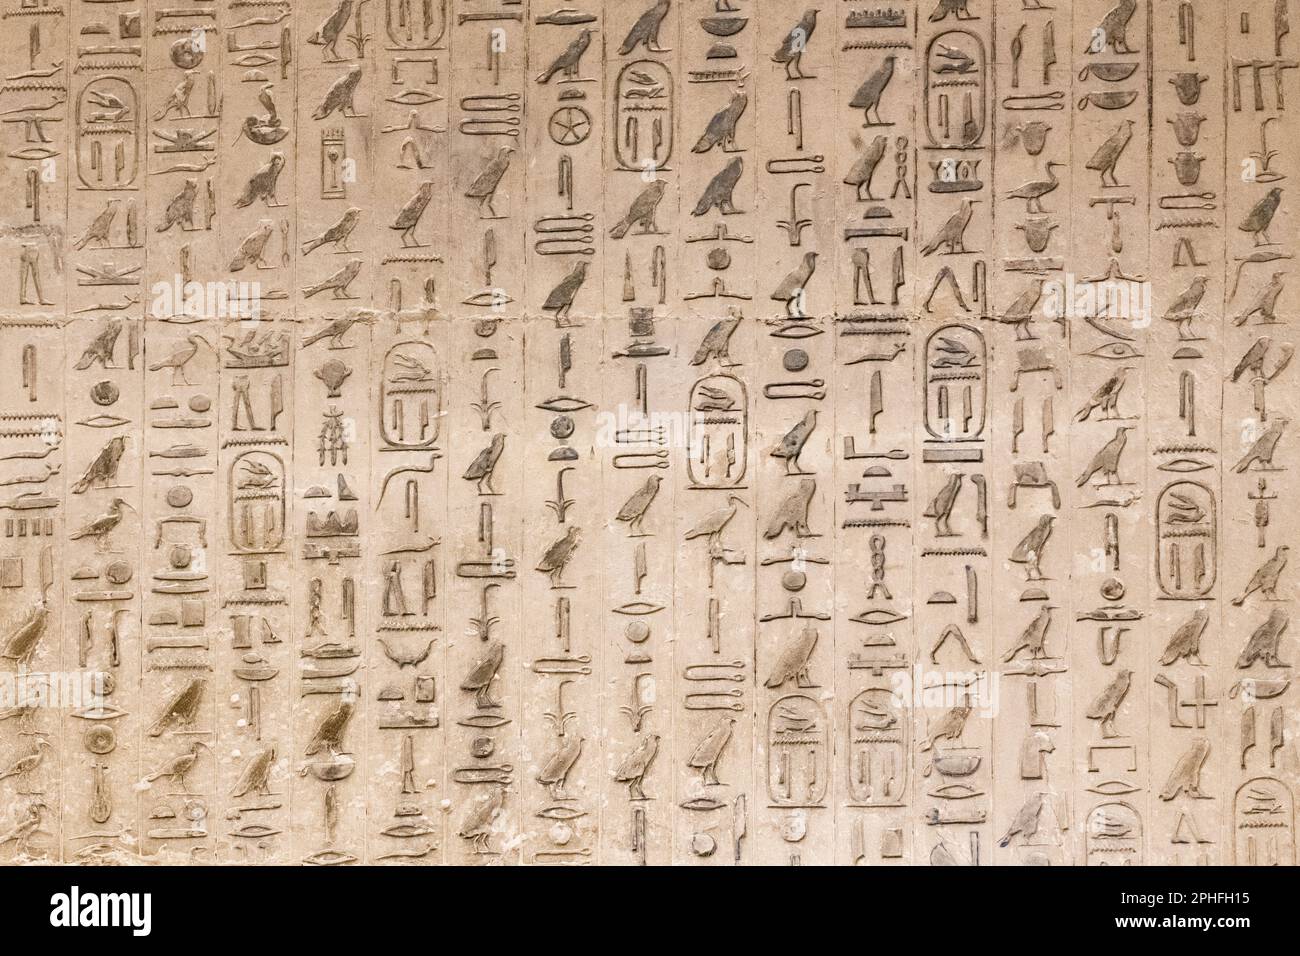 Authentic hieroglyphic inscriptions inside an underground burial chamber by the Pyramid of Djoser at the Saqqara Necropolis in Giza, Egypt Stock Photo